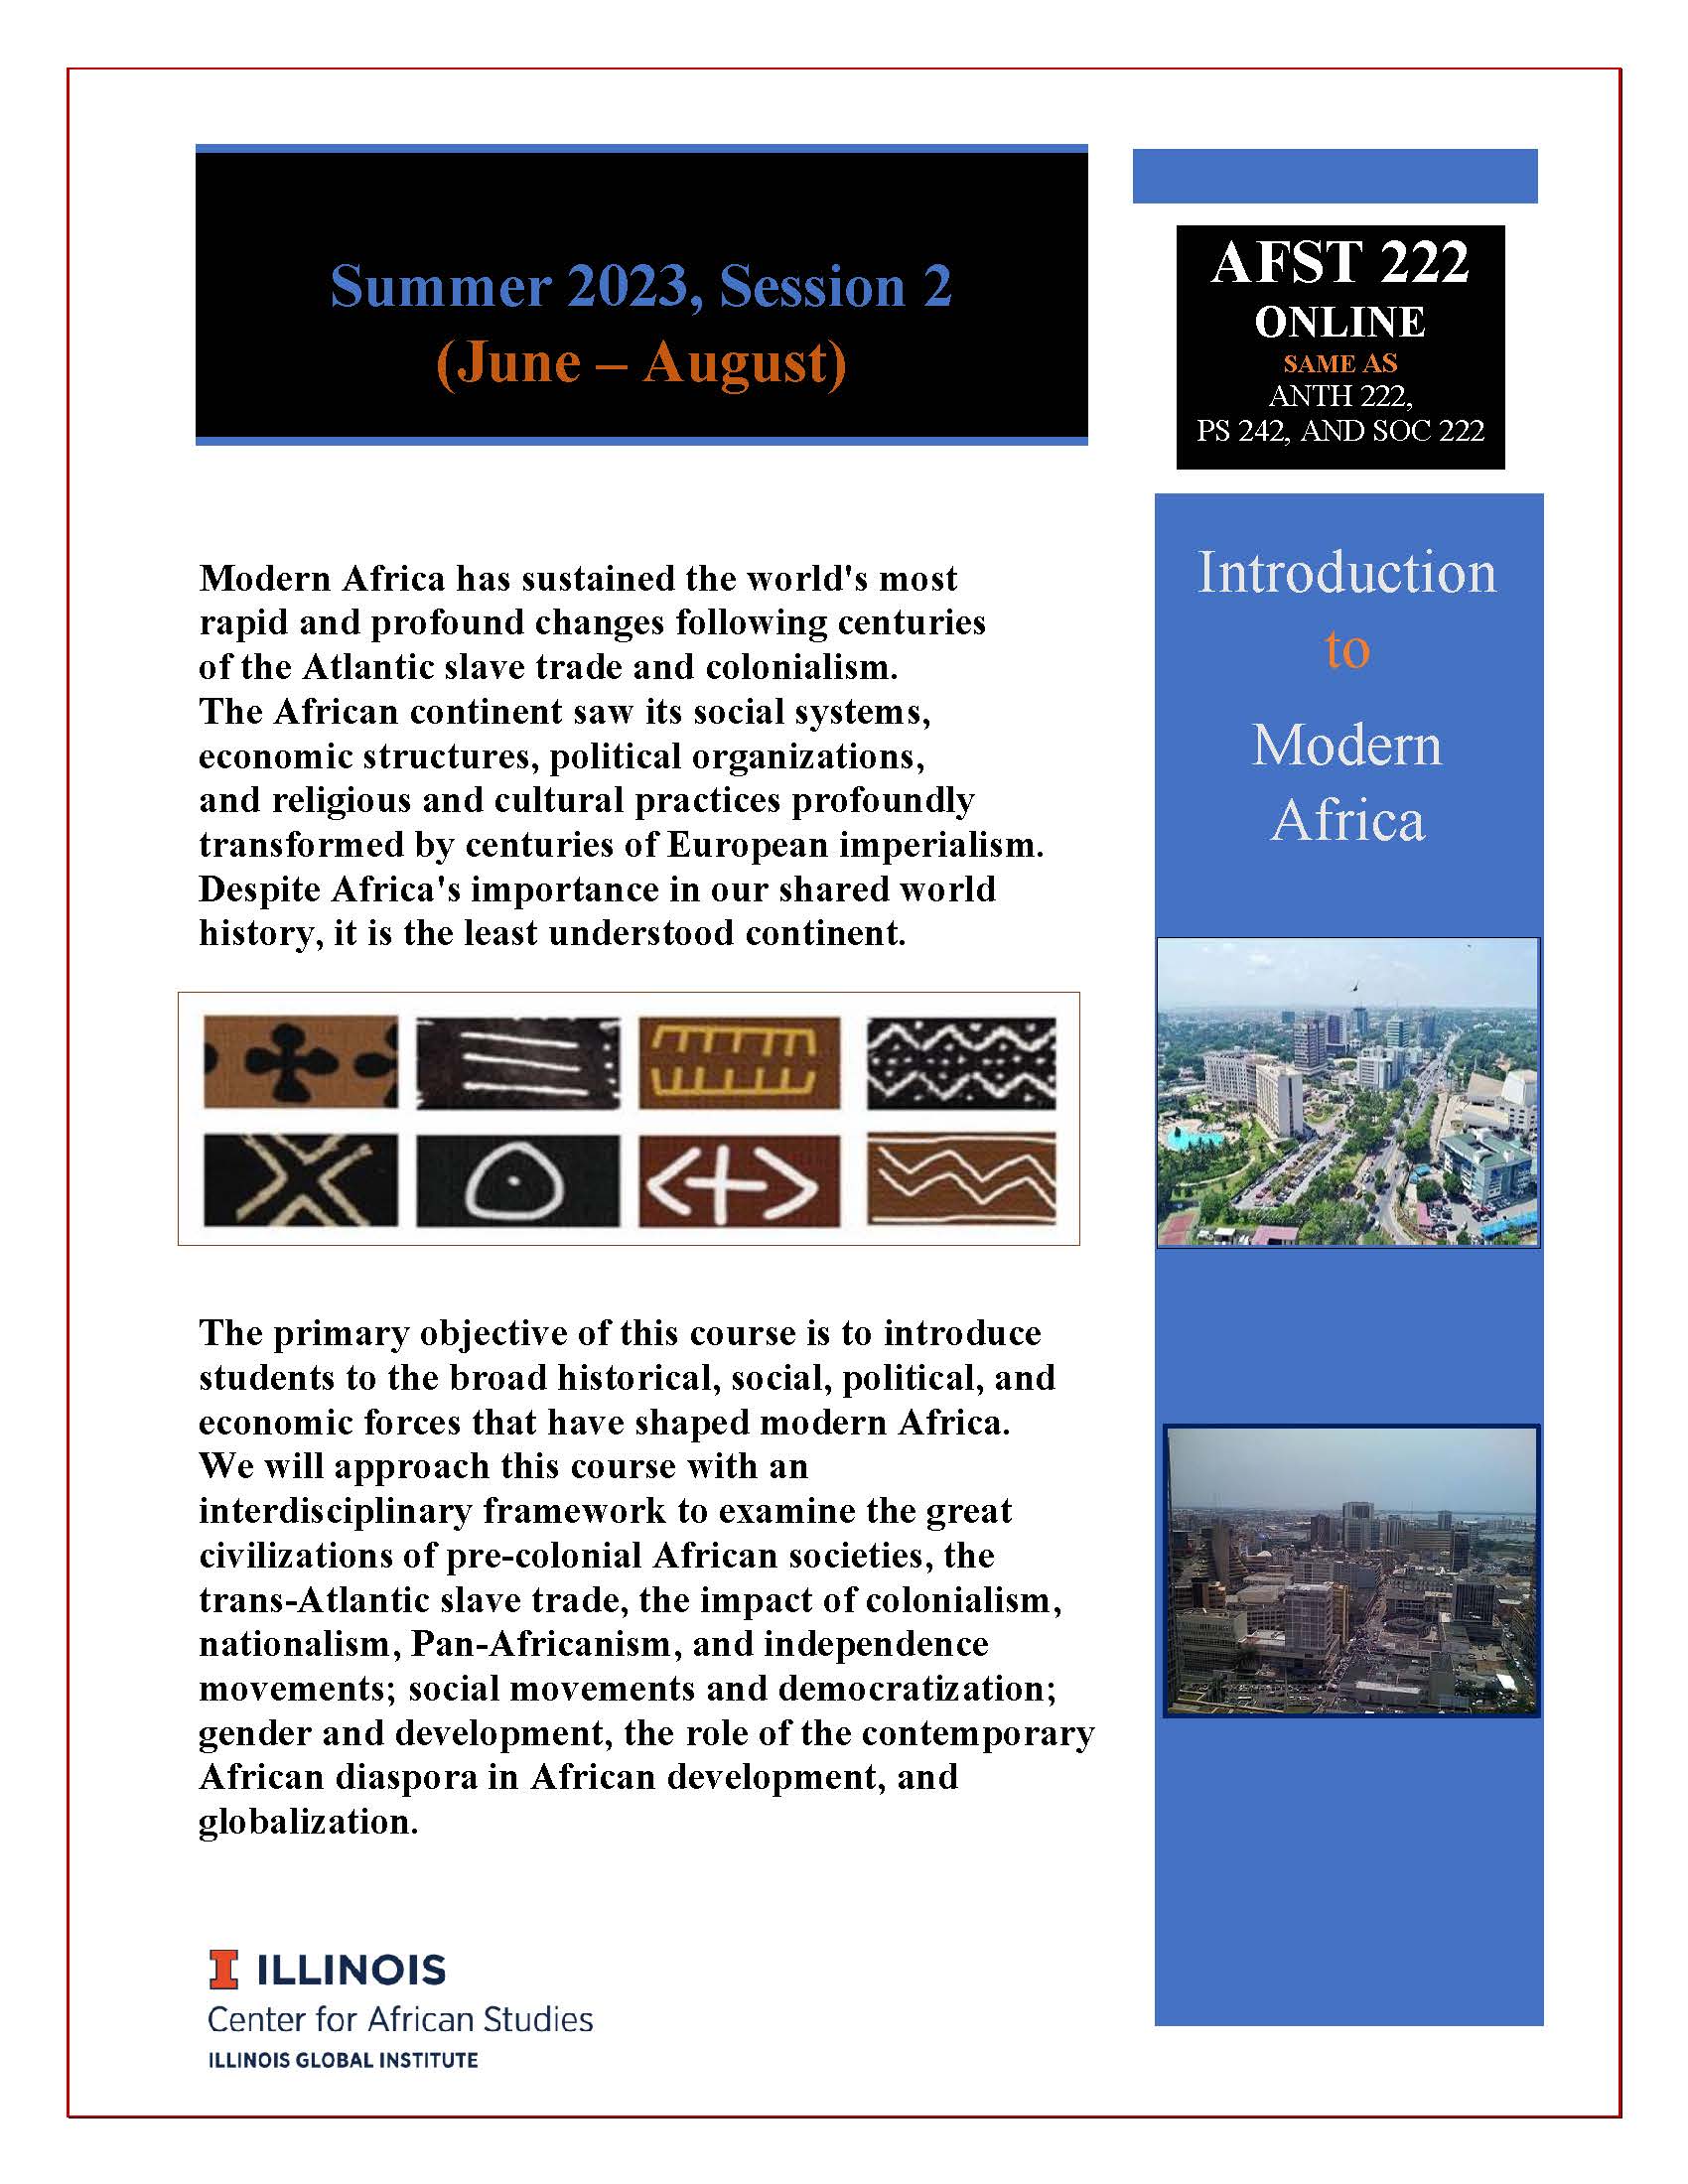 AFST flyer: African cities and art